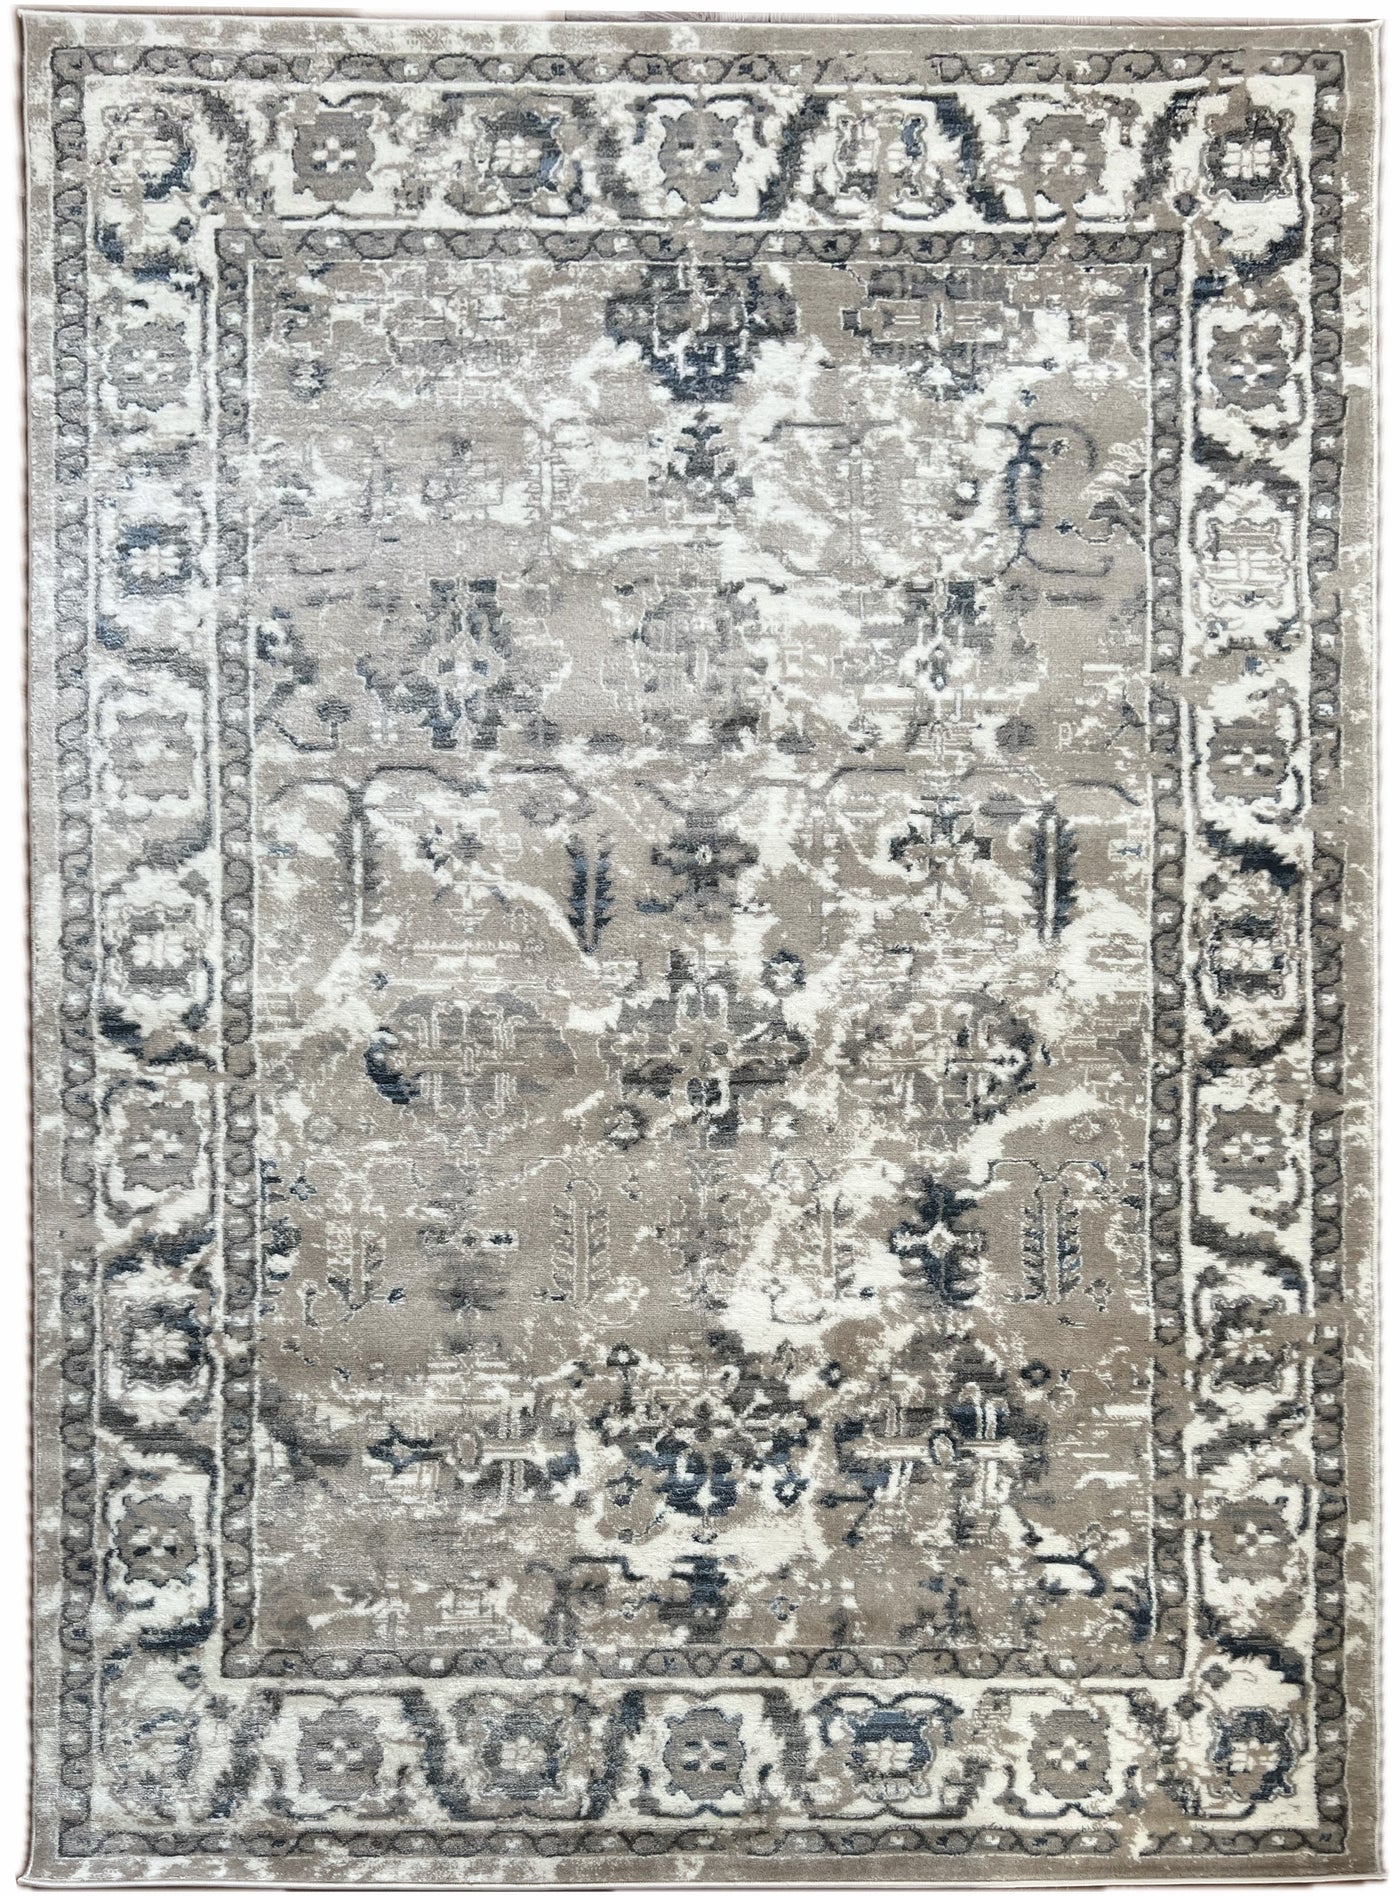 Canvello Area Rugs Premium Rugs for Living Room, Bedroom, Home Dining, Ivory, Grey, Beige